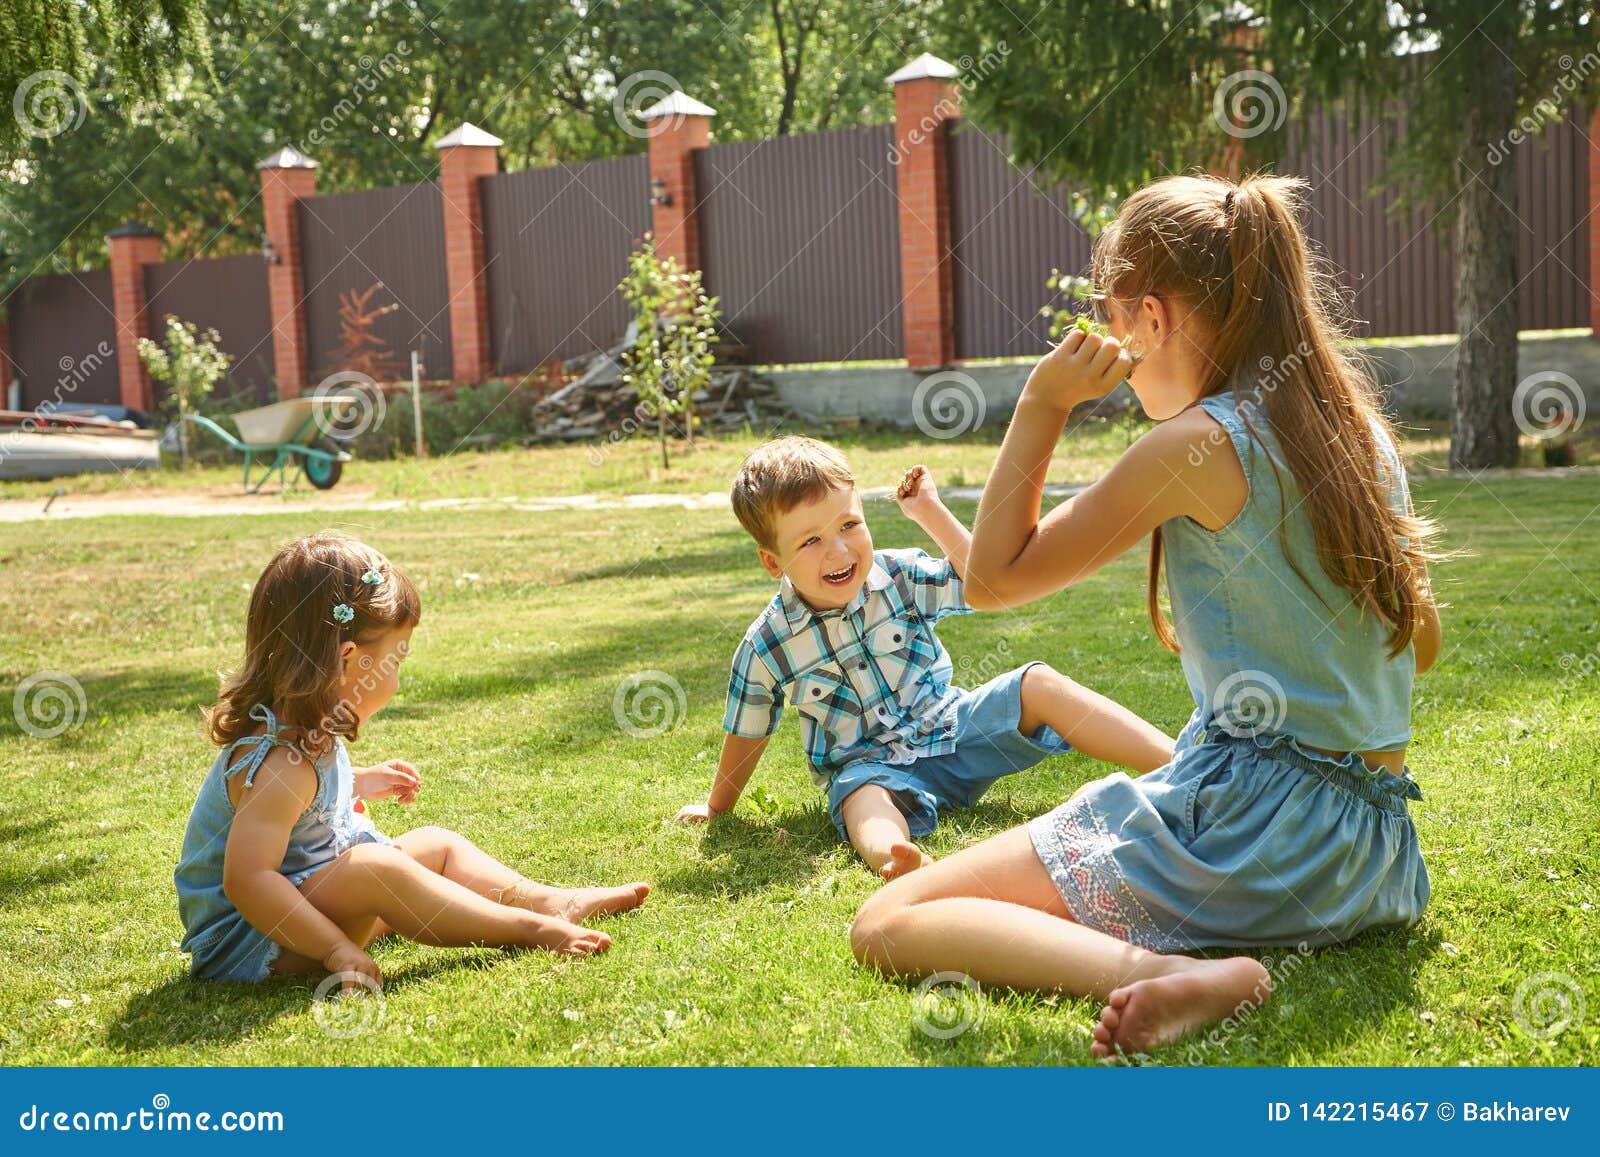 Happy Playful Children Outdoors in the Summer on Grass in a Backyard